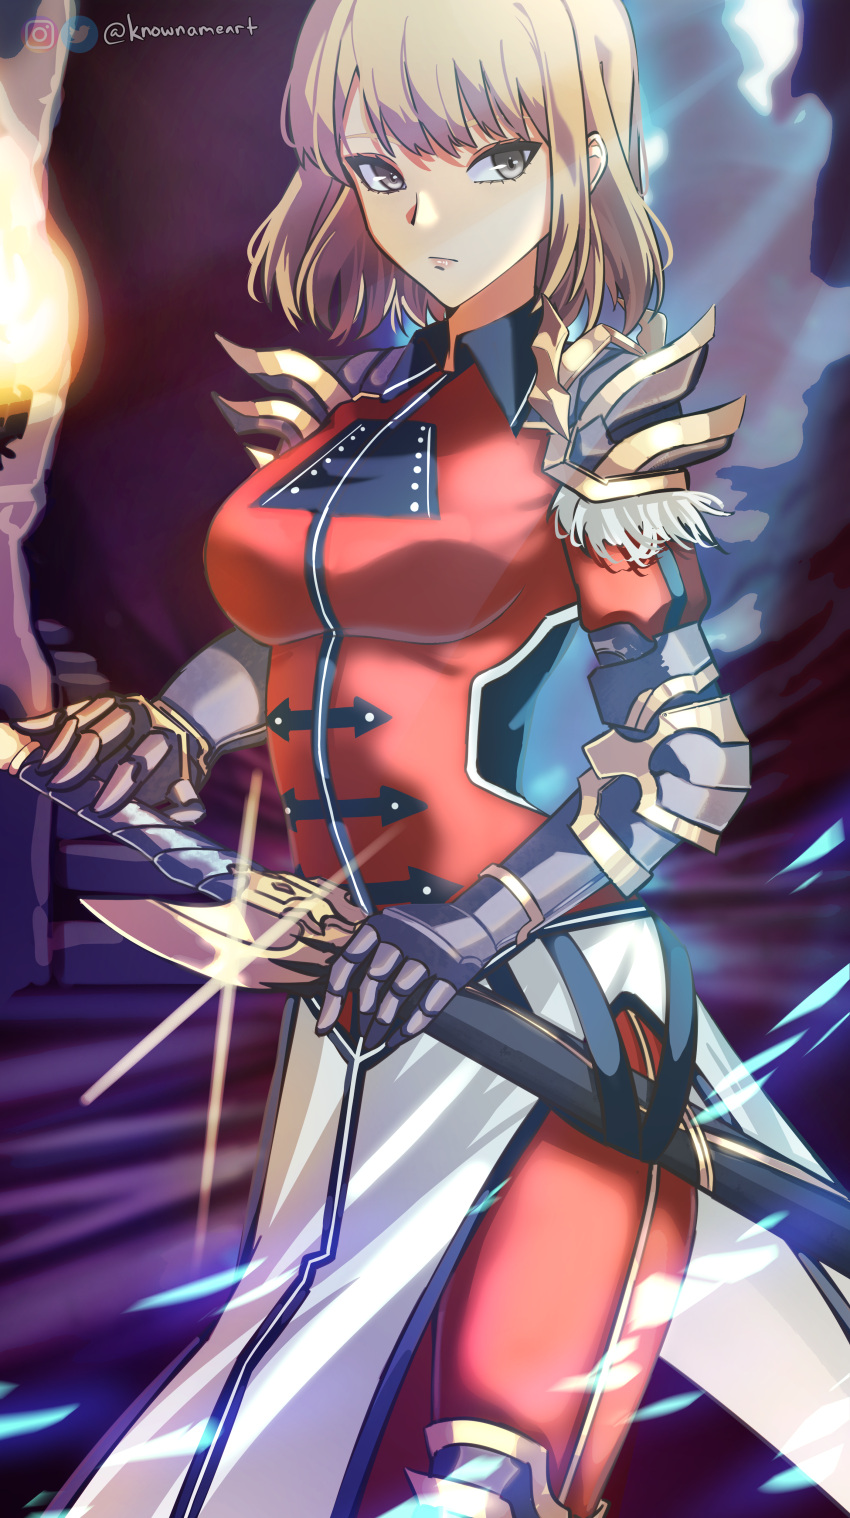 1girl absurdres armor blonde_hair breasts cha_hae-in gauntlets grey_eyes highres holding holding_sword holding_weapon instagram_logo knownameart large_breasts looking_at_viewer red_uniform shoulder_armor solo solo_leveling sword torch twitter_logo weapon